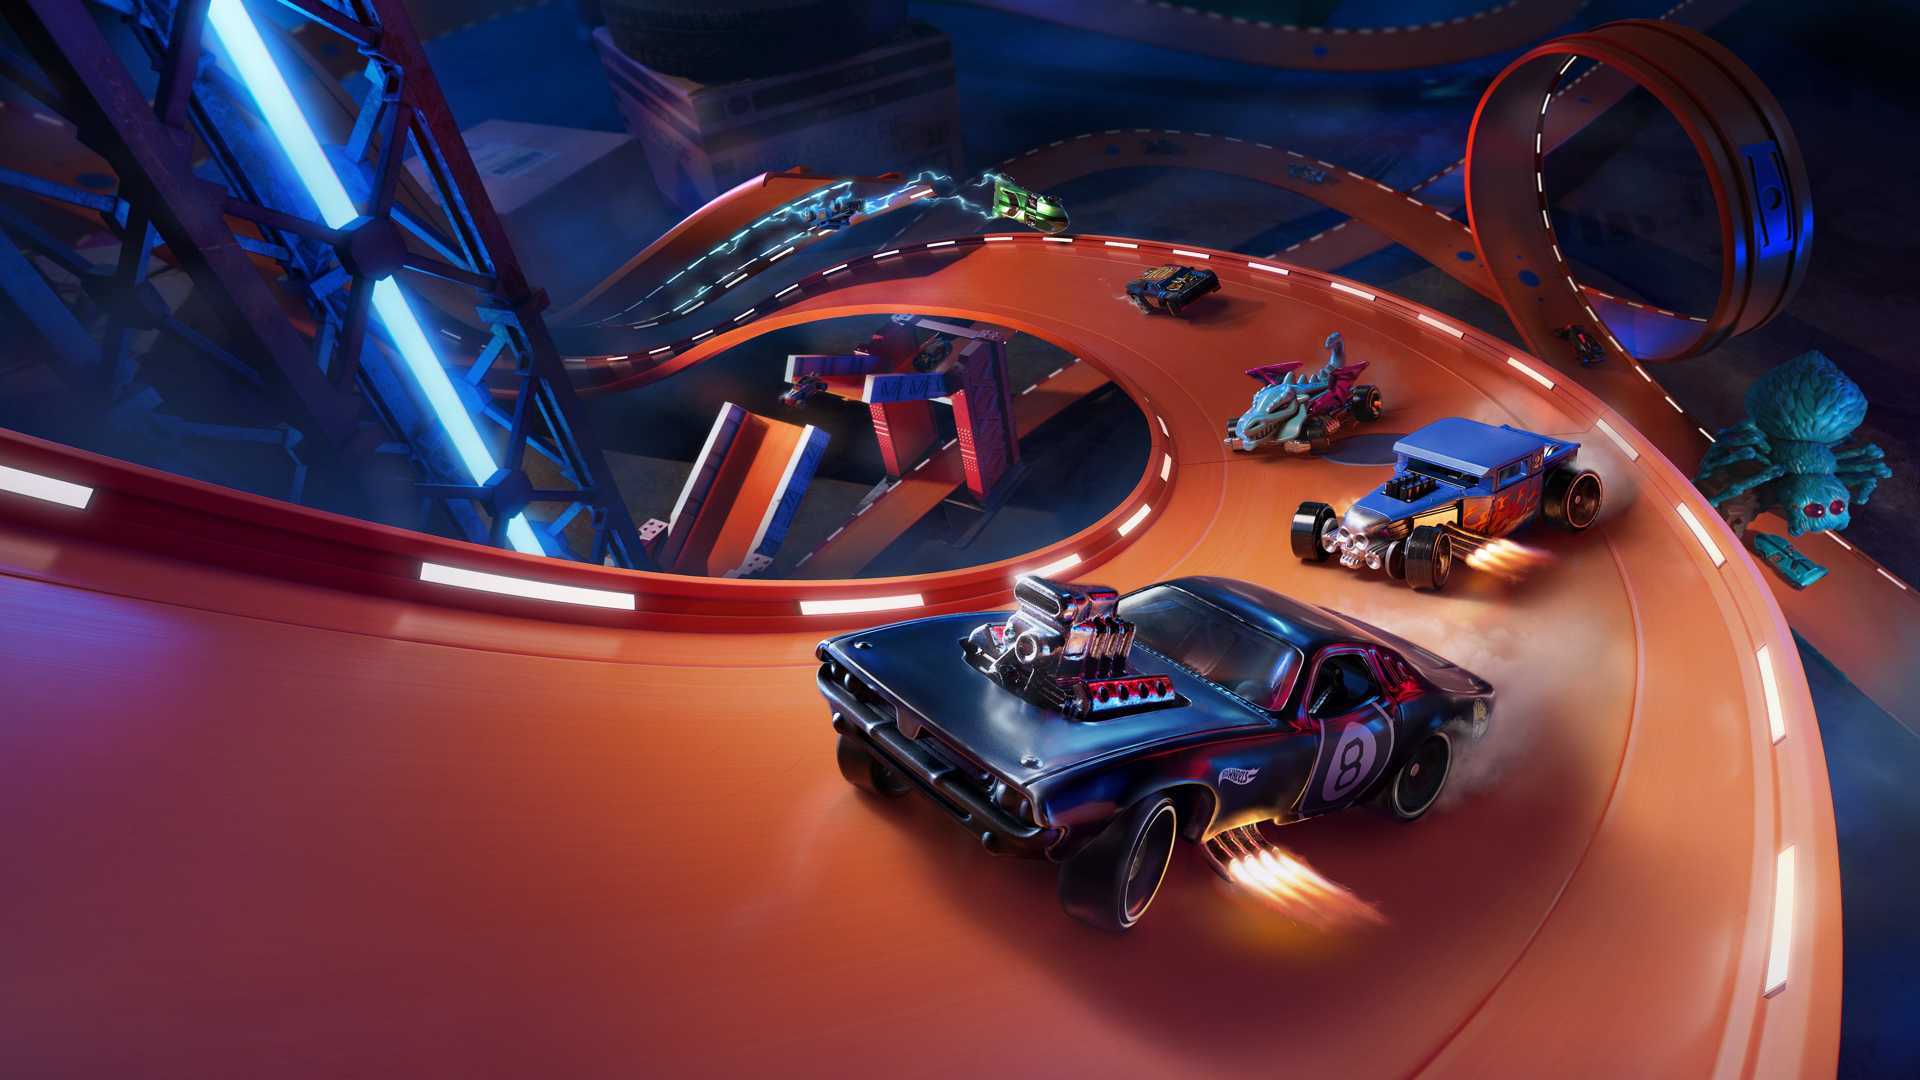 free download hot wheels unleashed xbox